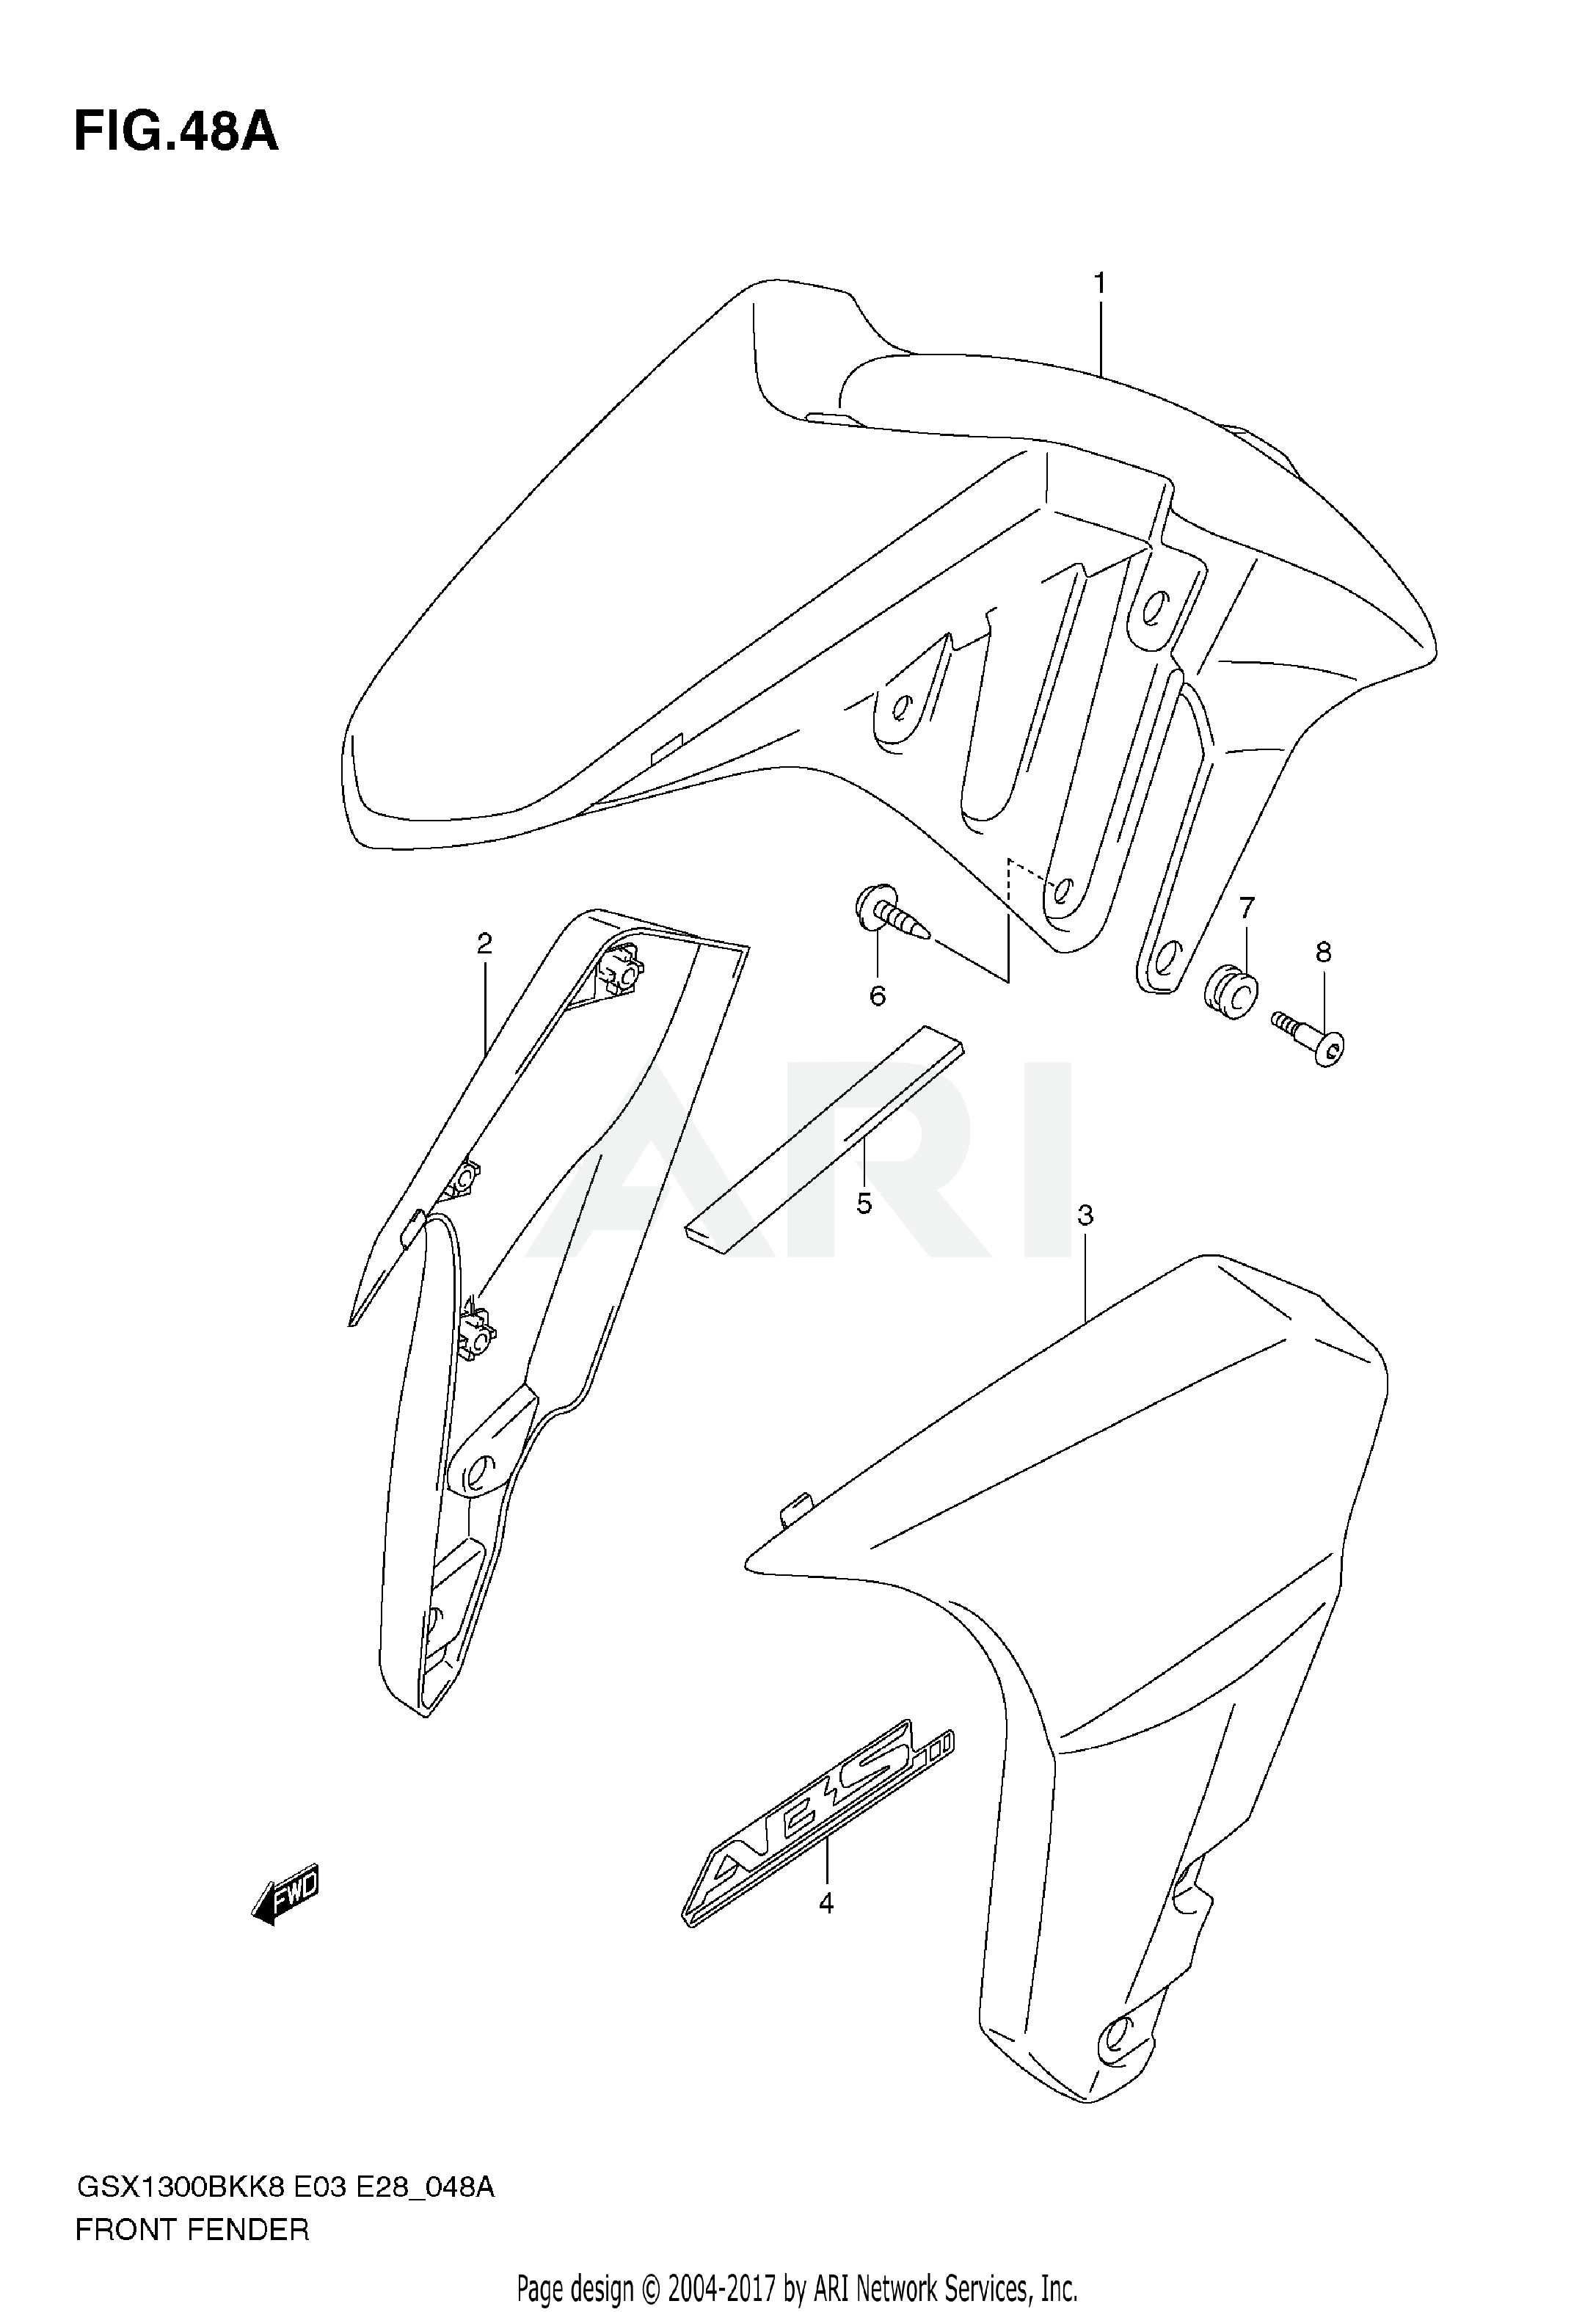 FRONT FENDER (WITH ABS)